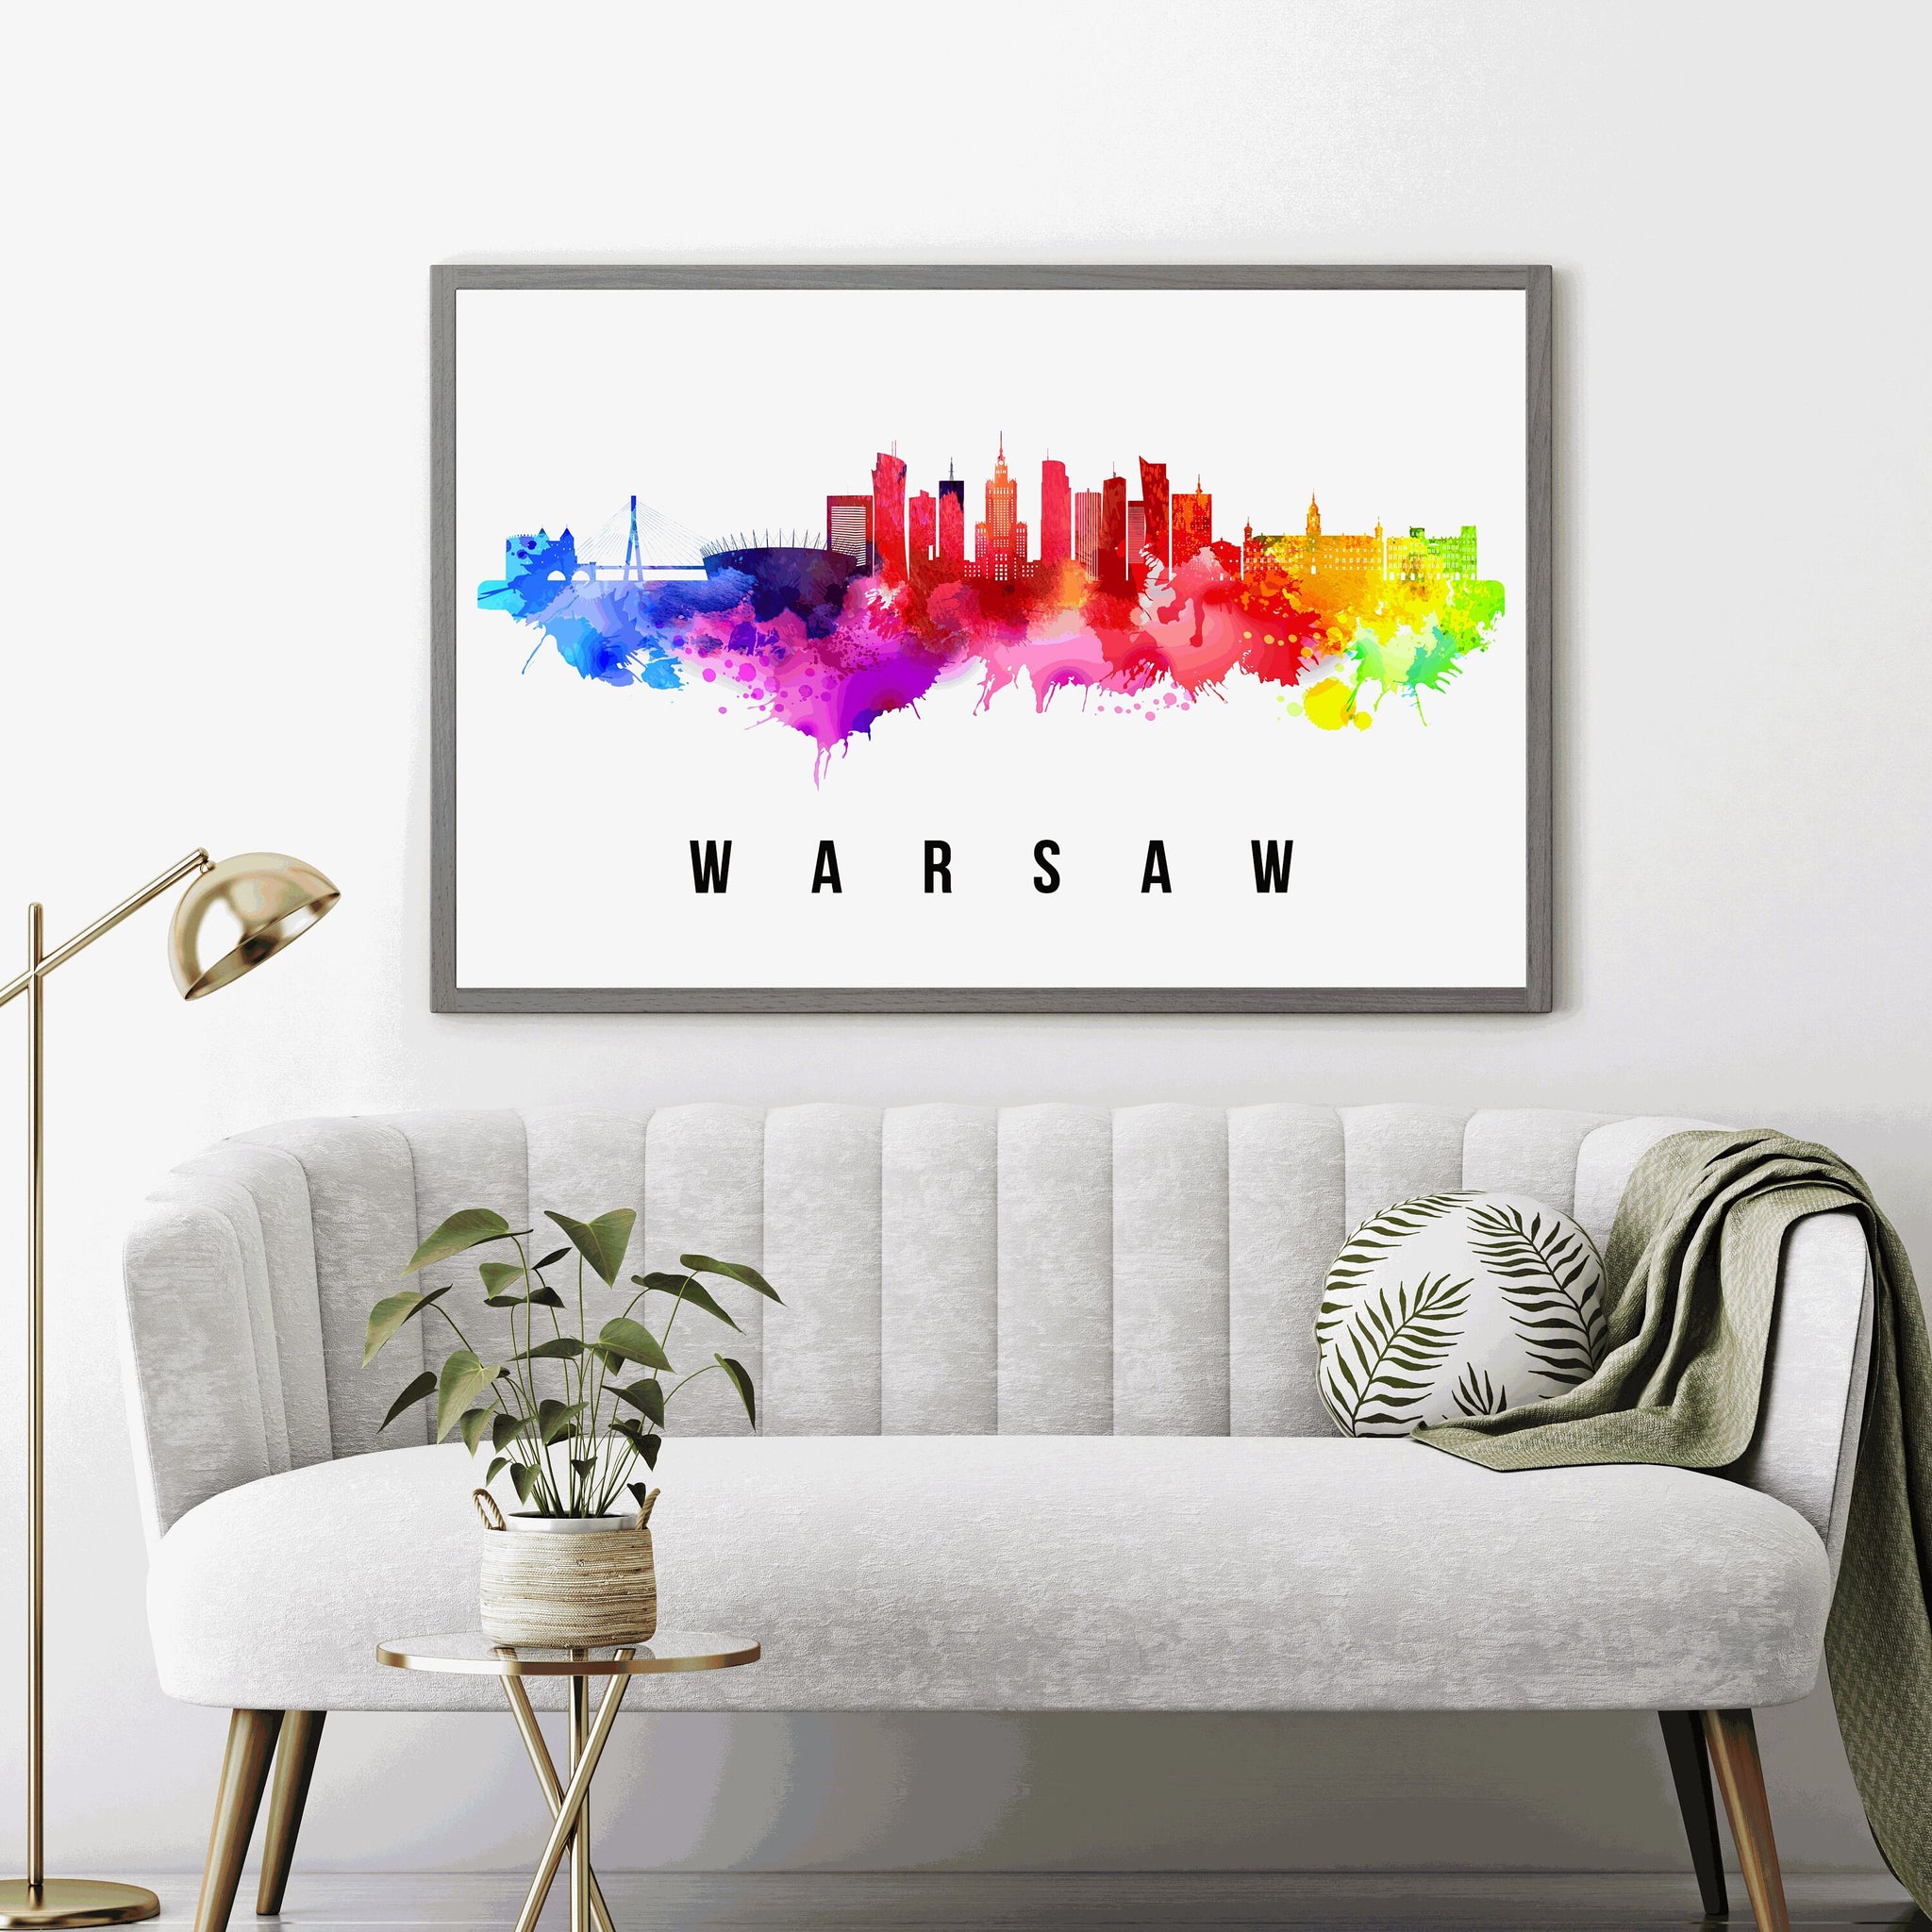 WARSAW - POLAND Poster, Skyline Poster Cityscape and Landmark Warsaw City Illustration Home Wall Art, Office Decor